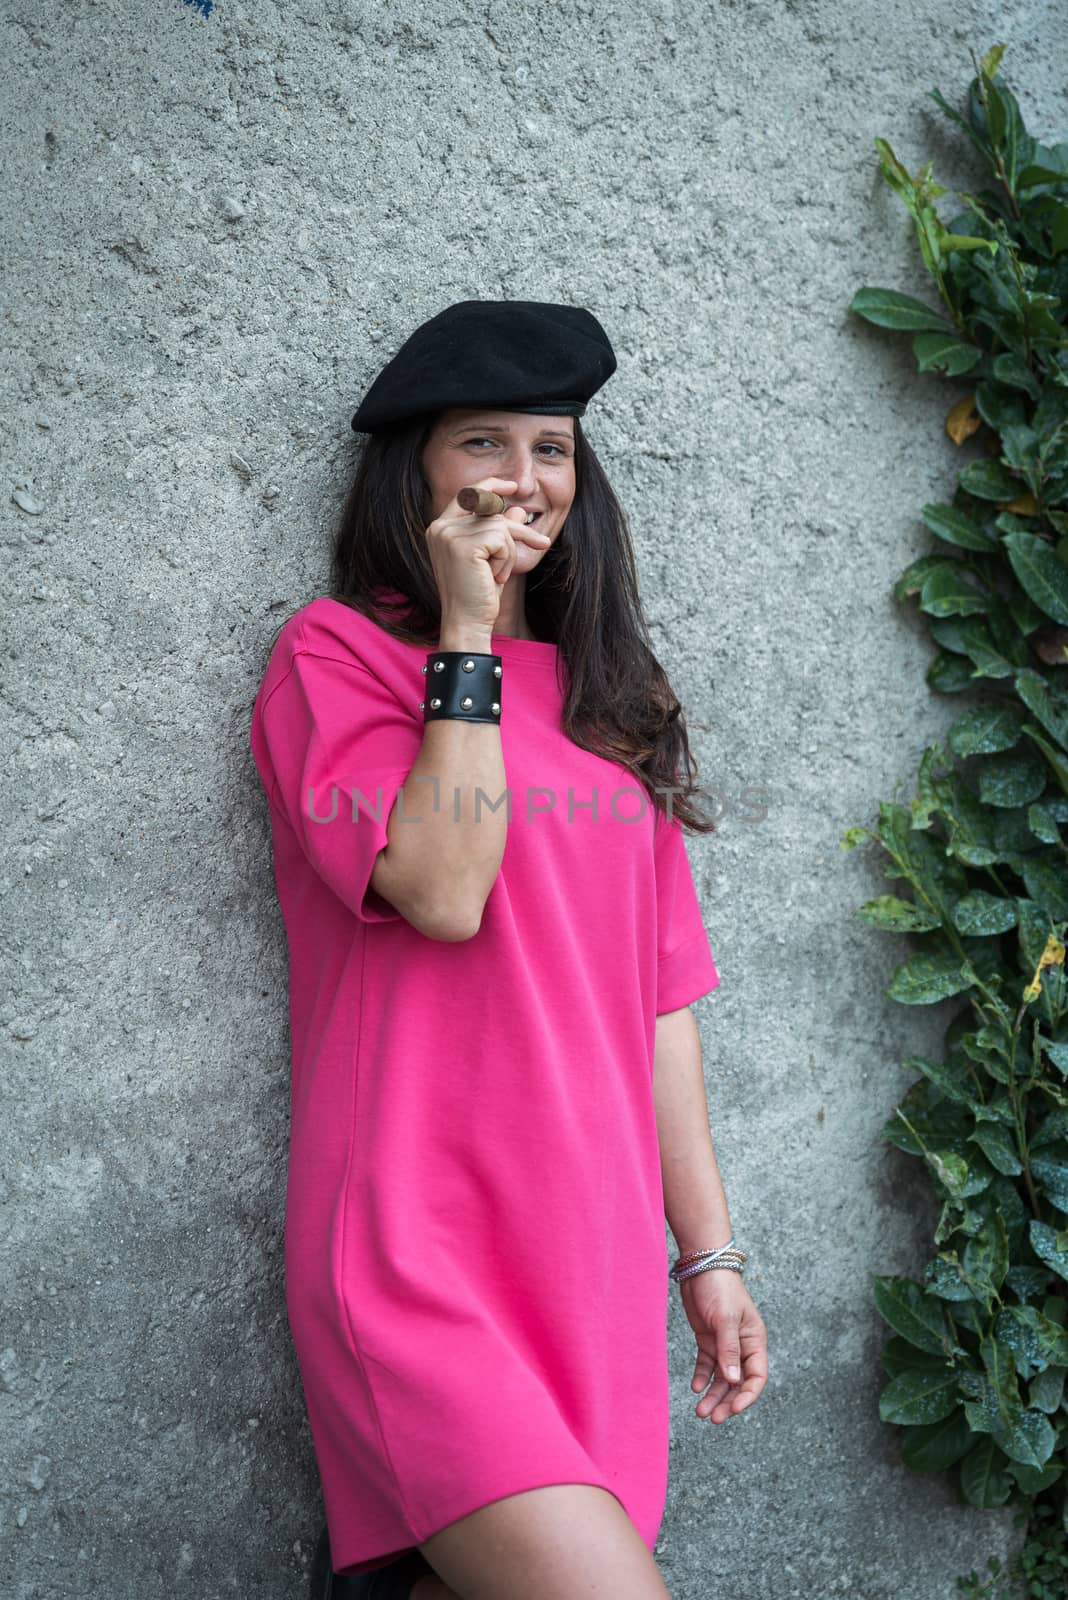 girl with dark hair smokes a big cigar wearing a black beret and a fuchsia dress and a bracelet, image of a woman posing in front of a light wall